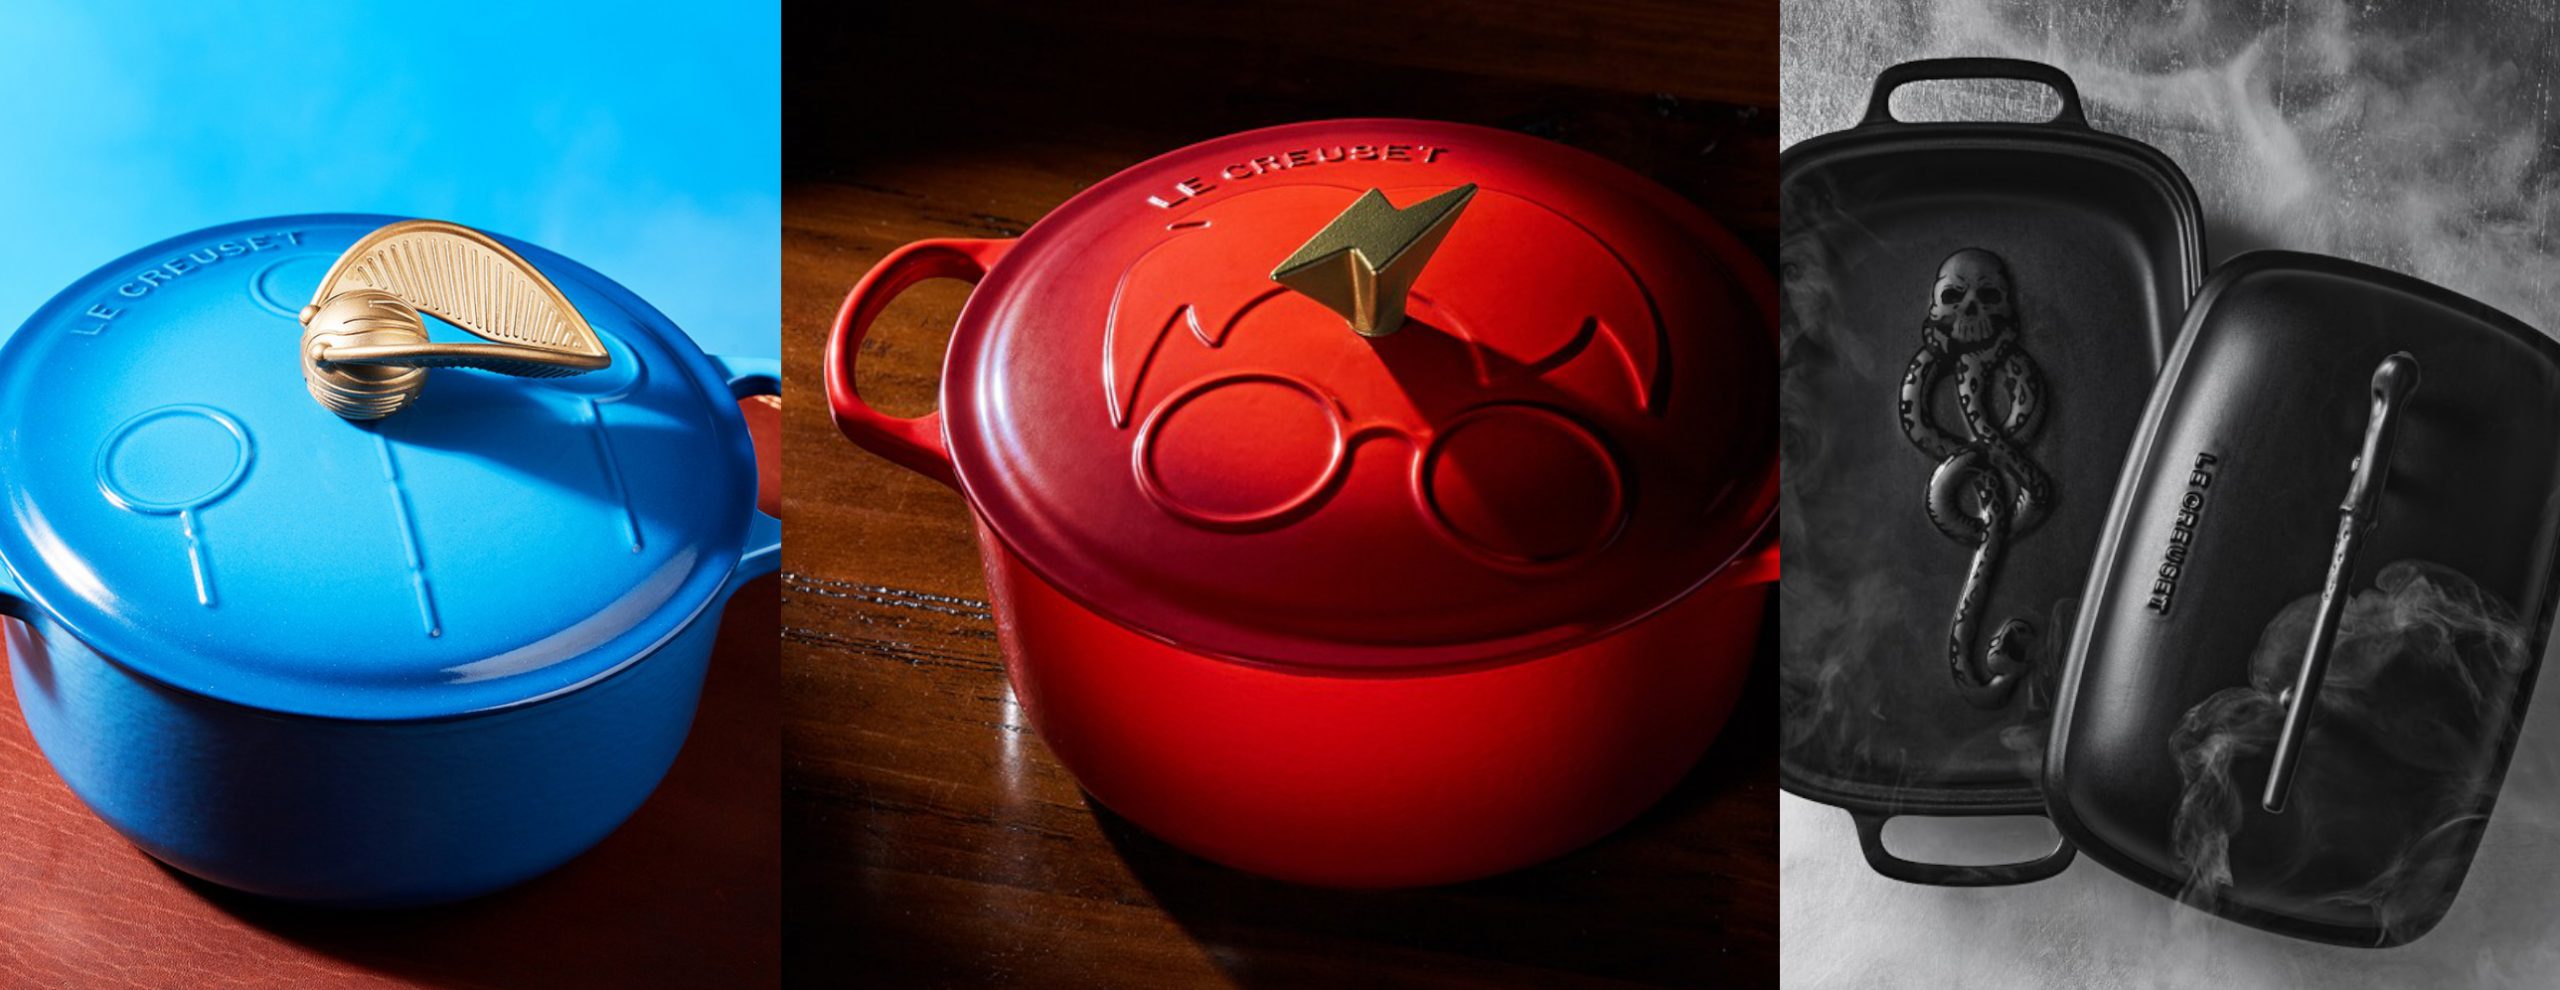 The Le Creuset x Harry Potter Cookware Collection, Including Dutch